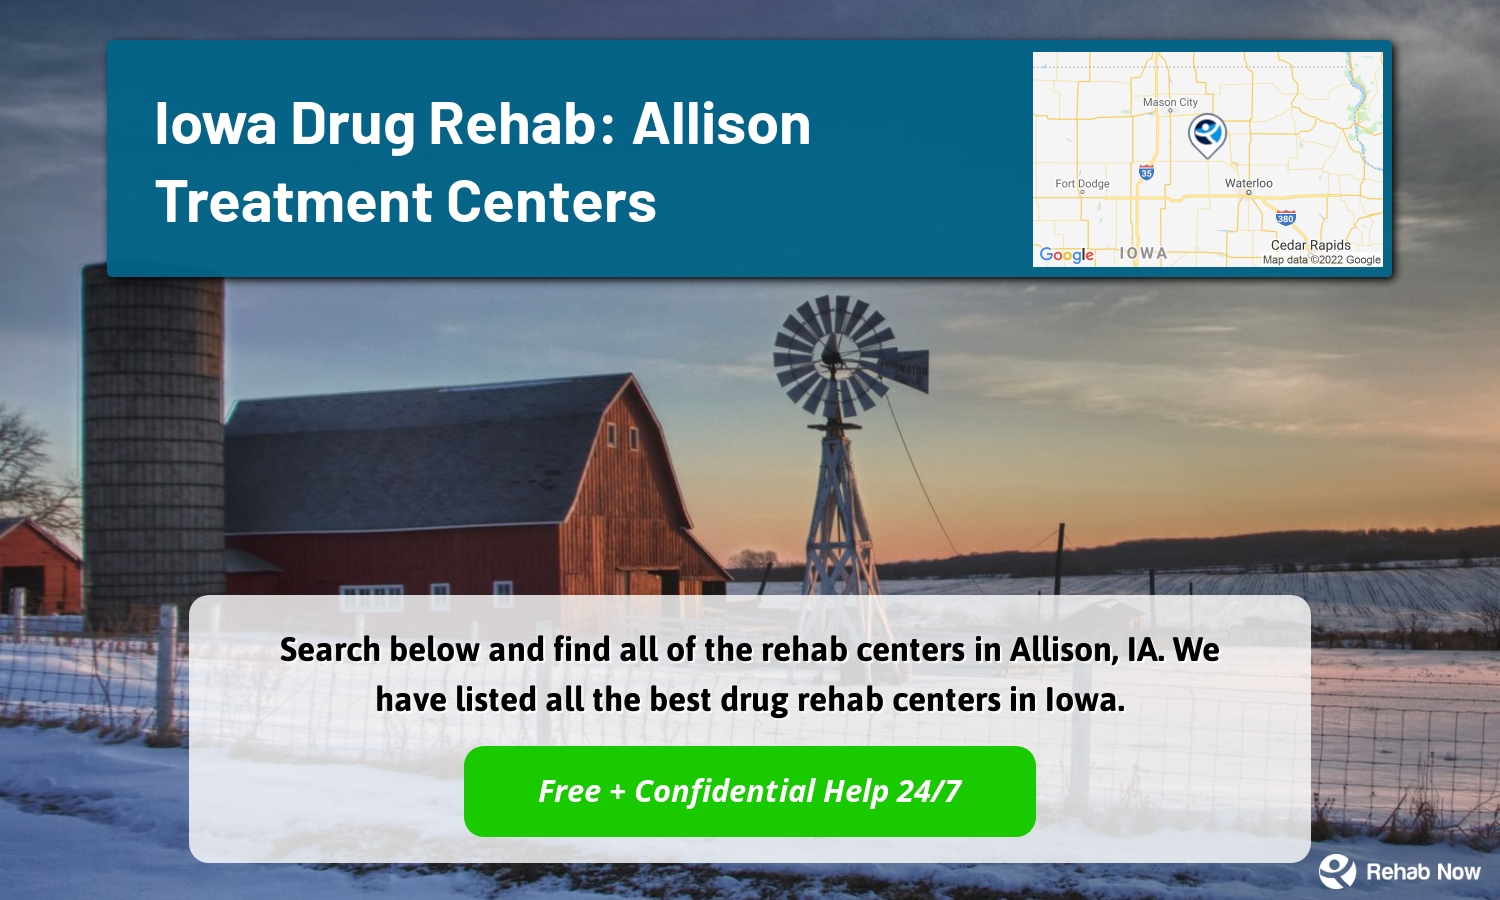 Search below and find all of the rehab centers in Allison, IA. We have listed all the best drug rehab centers in Iowa.